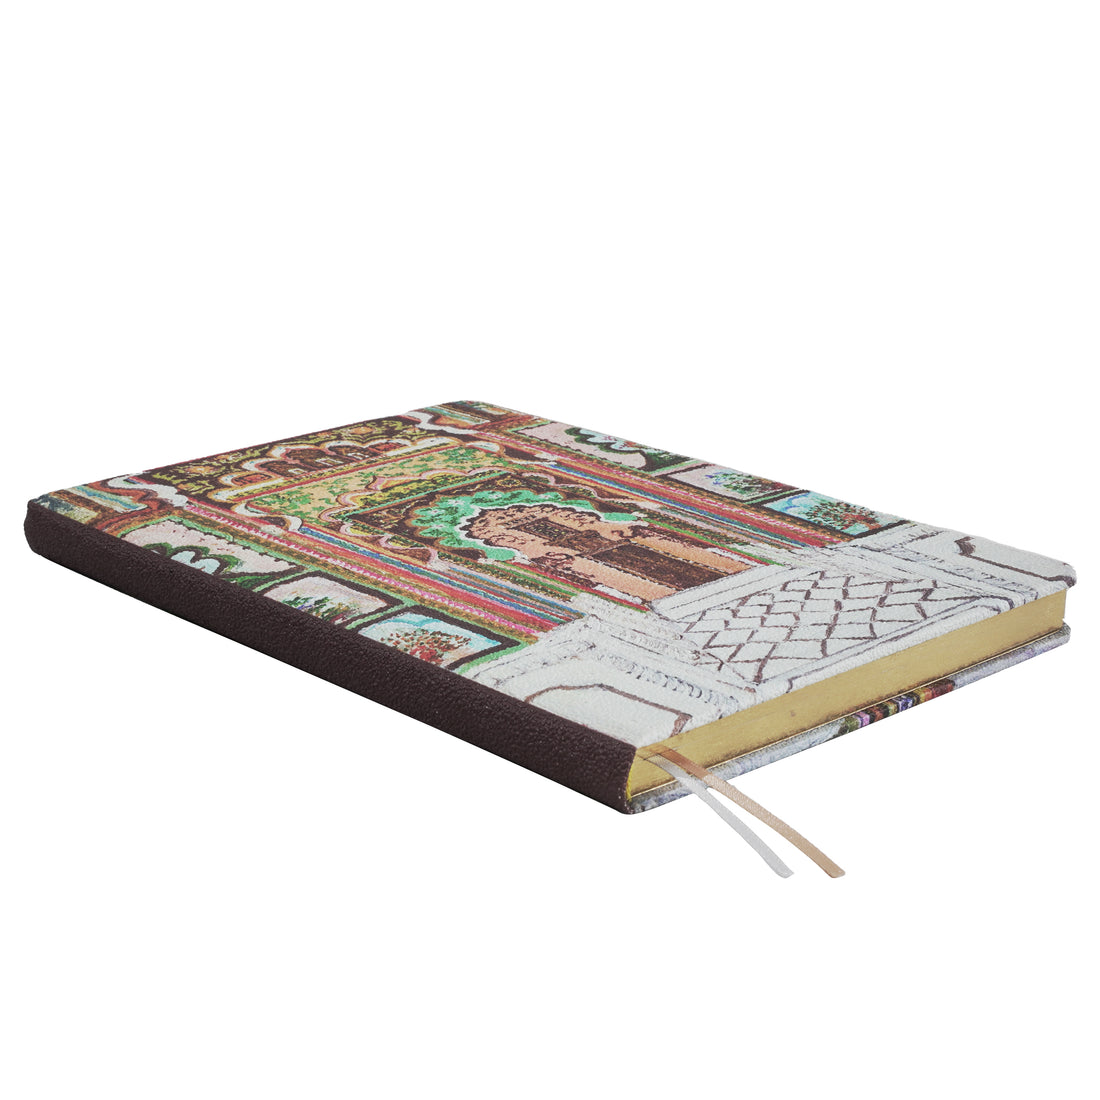 PATRIKA GATE, Dreamscape Collection, A5 Hardcover Diary, Lined